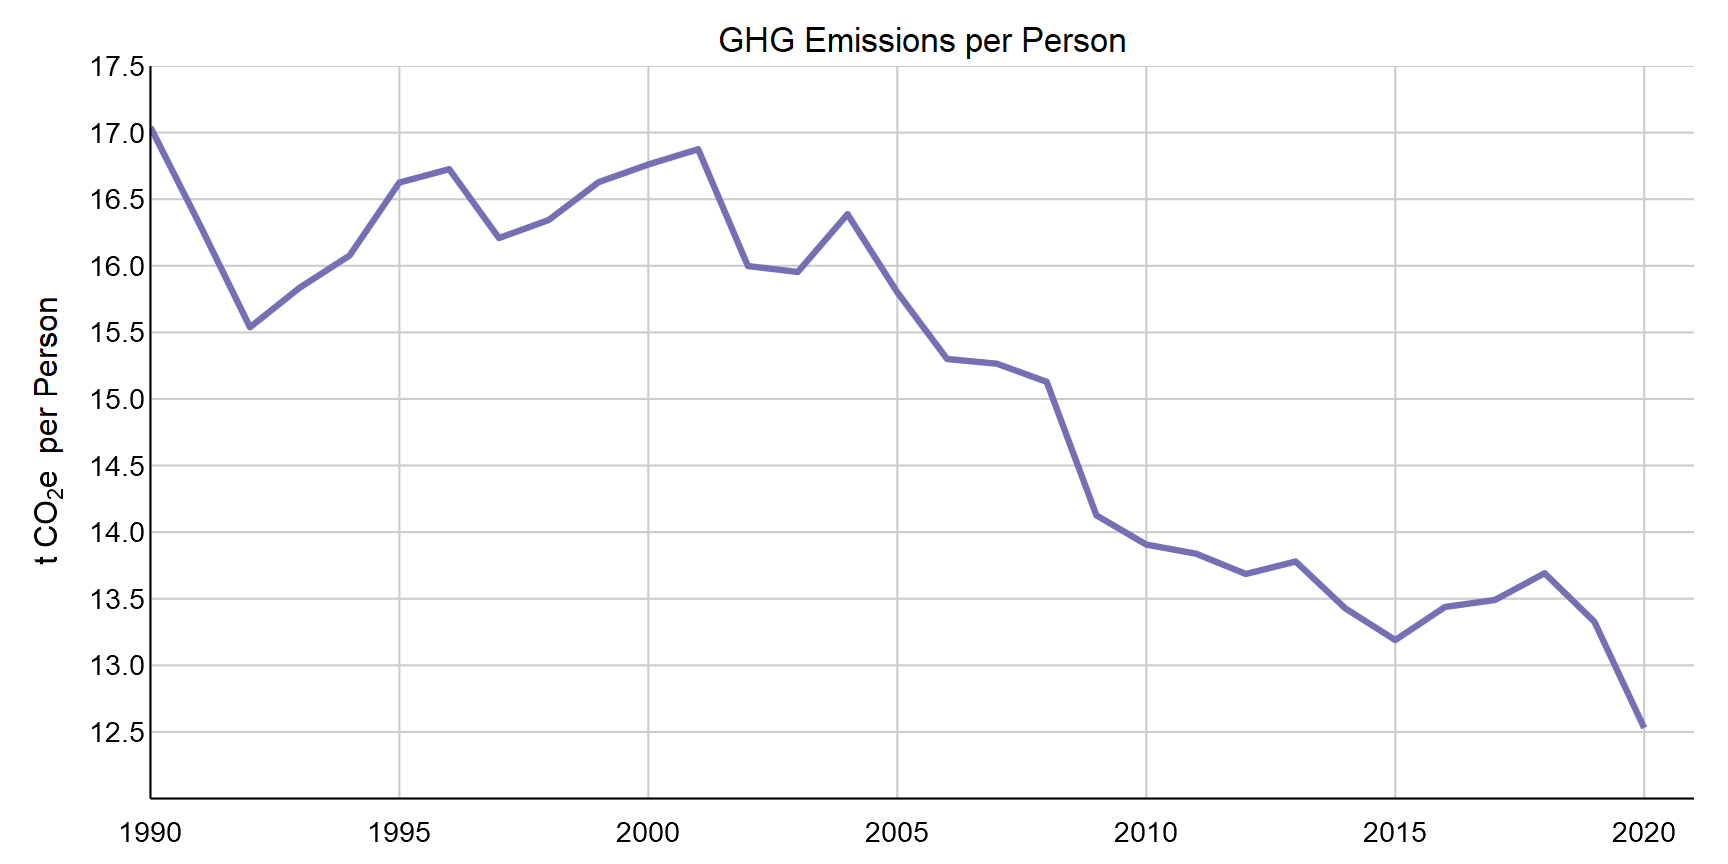 Greenhouse gas emissions per capita plotted over time from 1990 to 2020